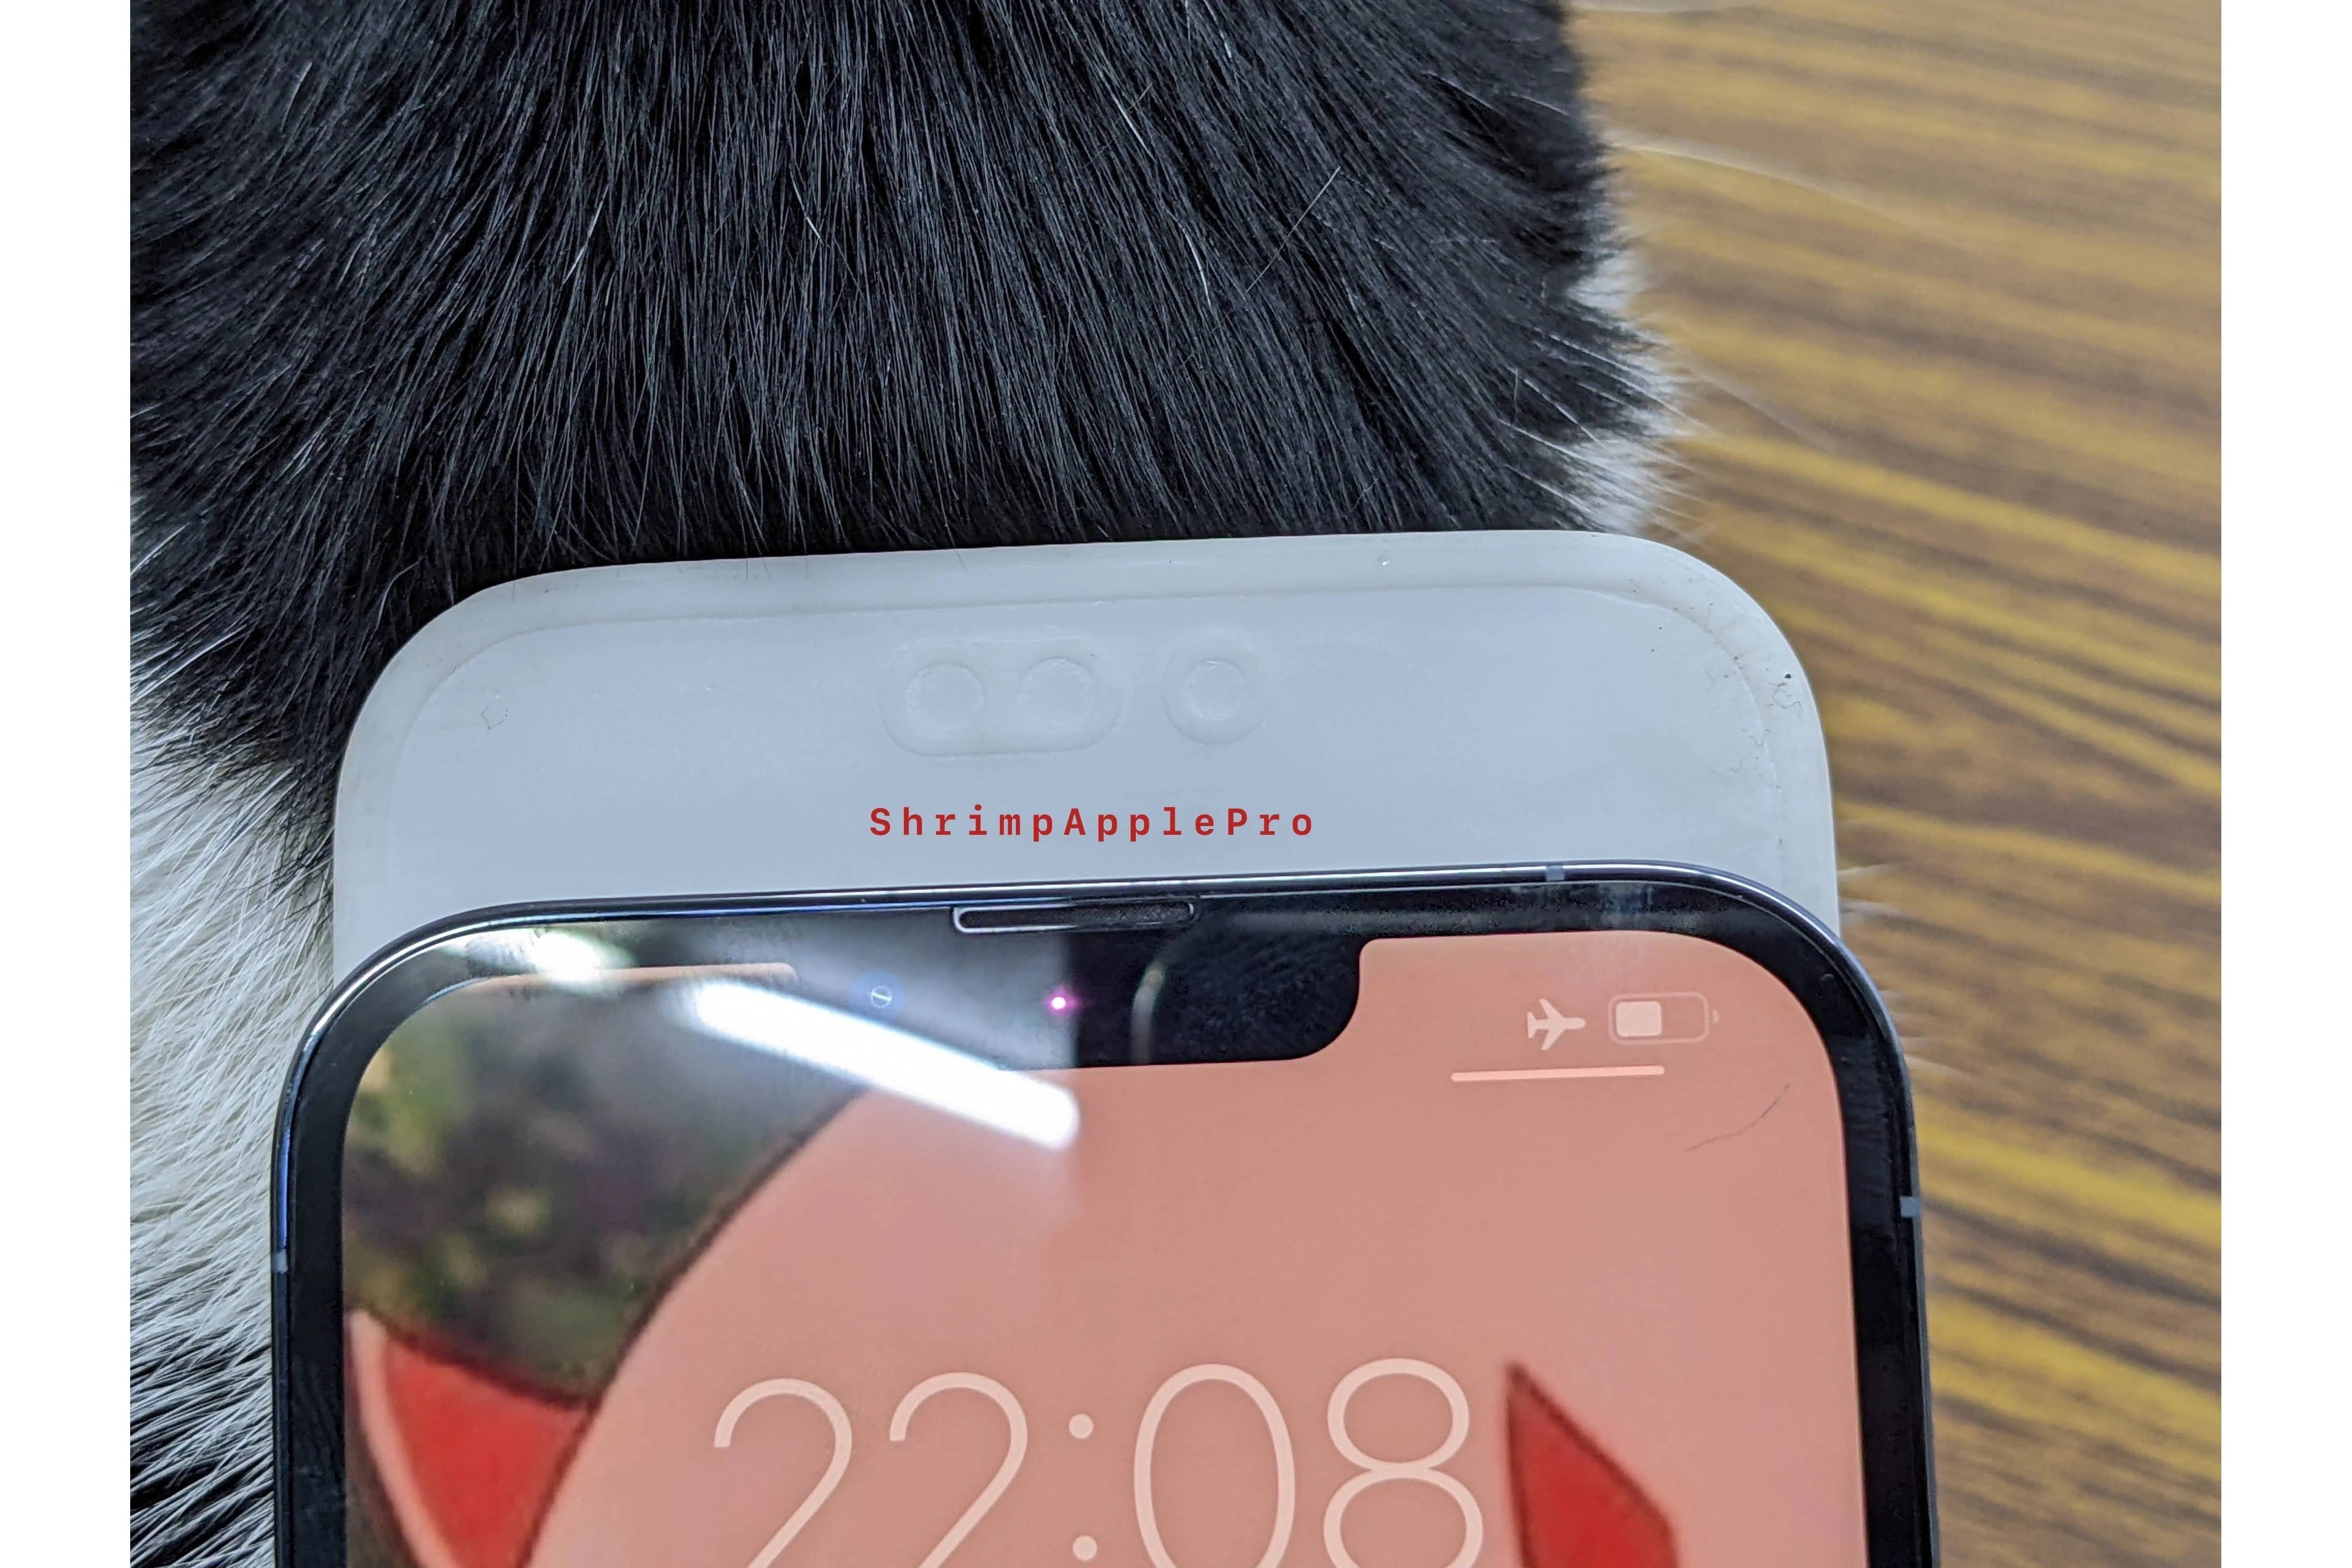 iPhone 14 dummy shows what the selfie camera cutout will look like - iPhone 14 camera: what to expect